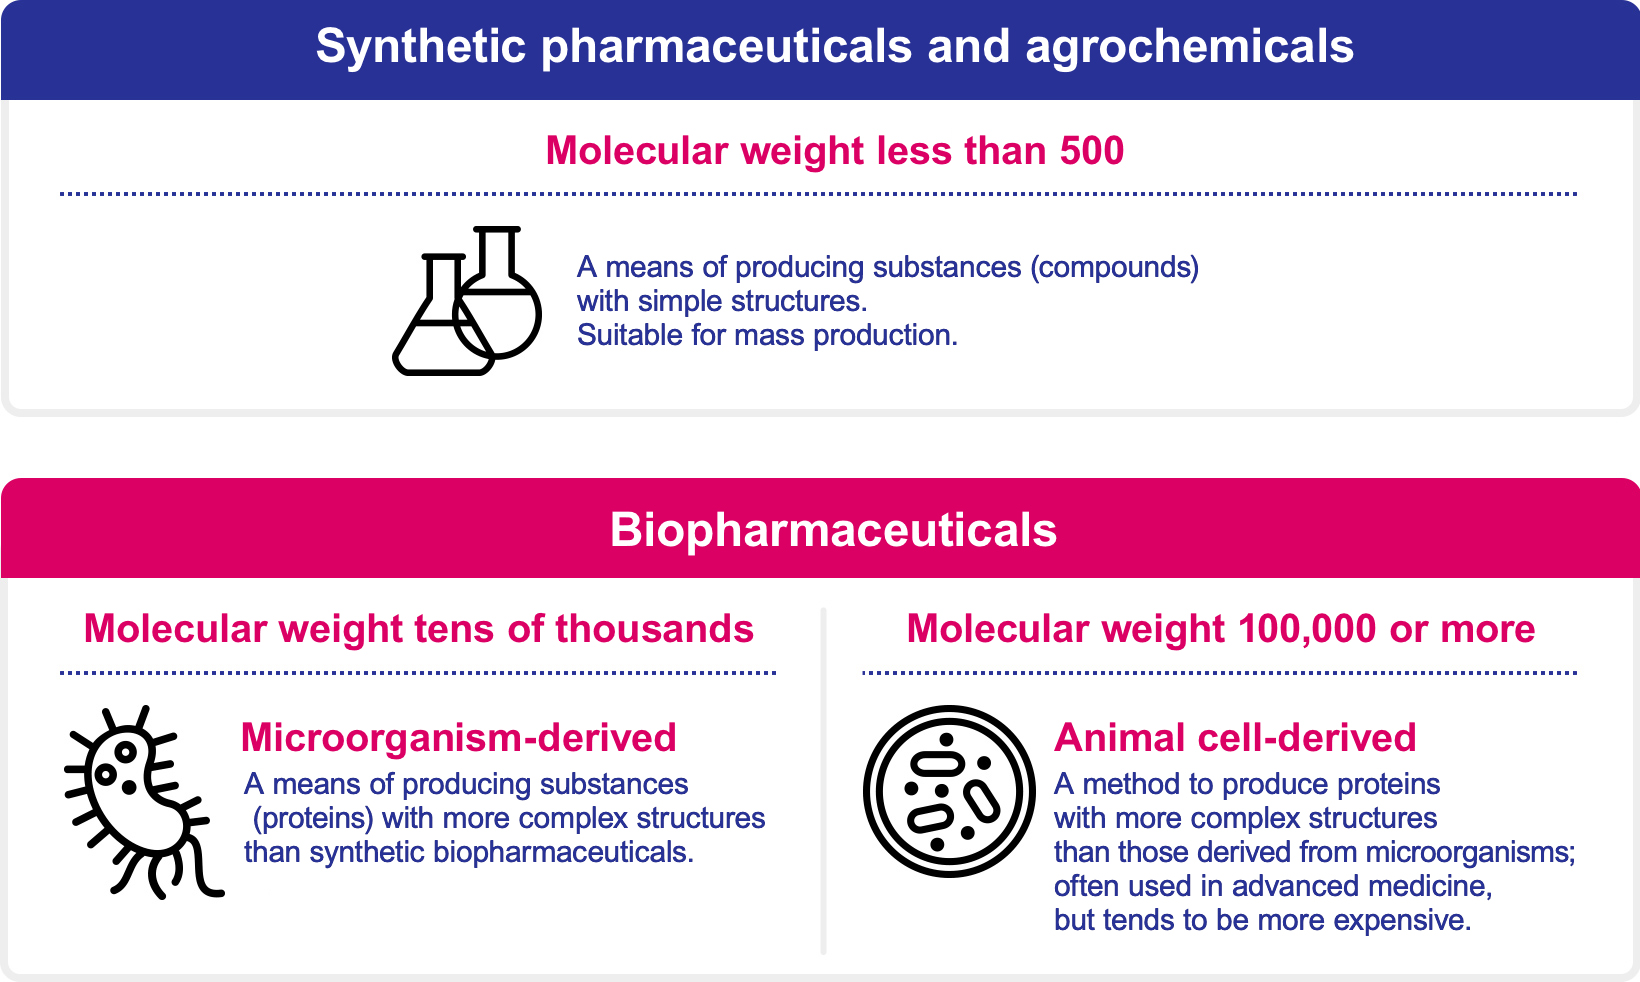 Synthetic pharmaceuticals and agrochemicals